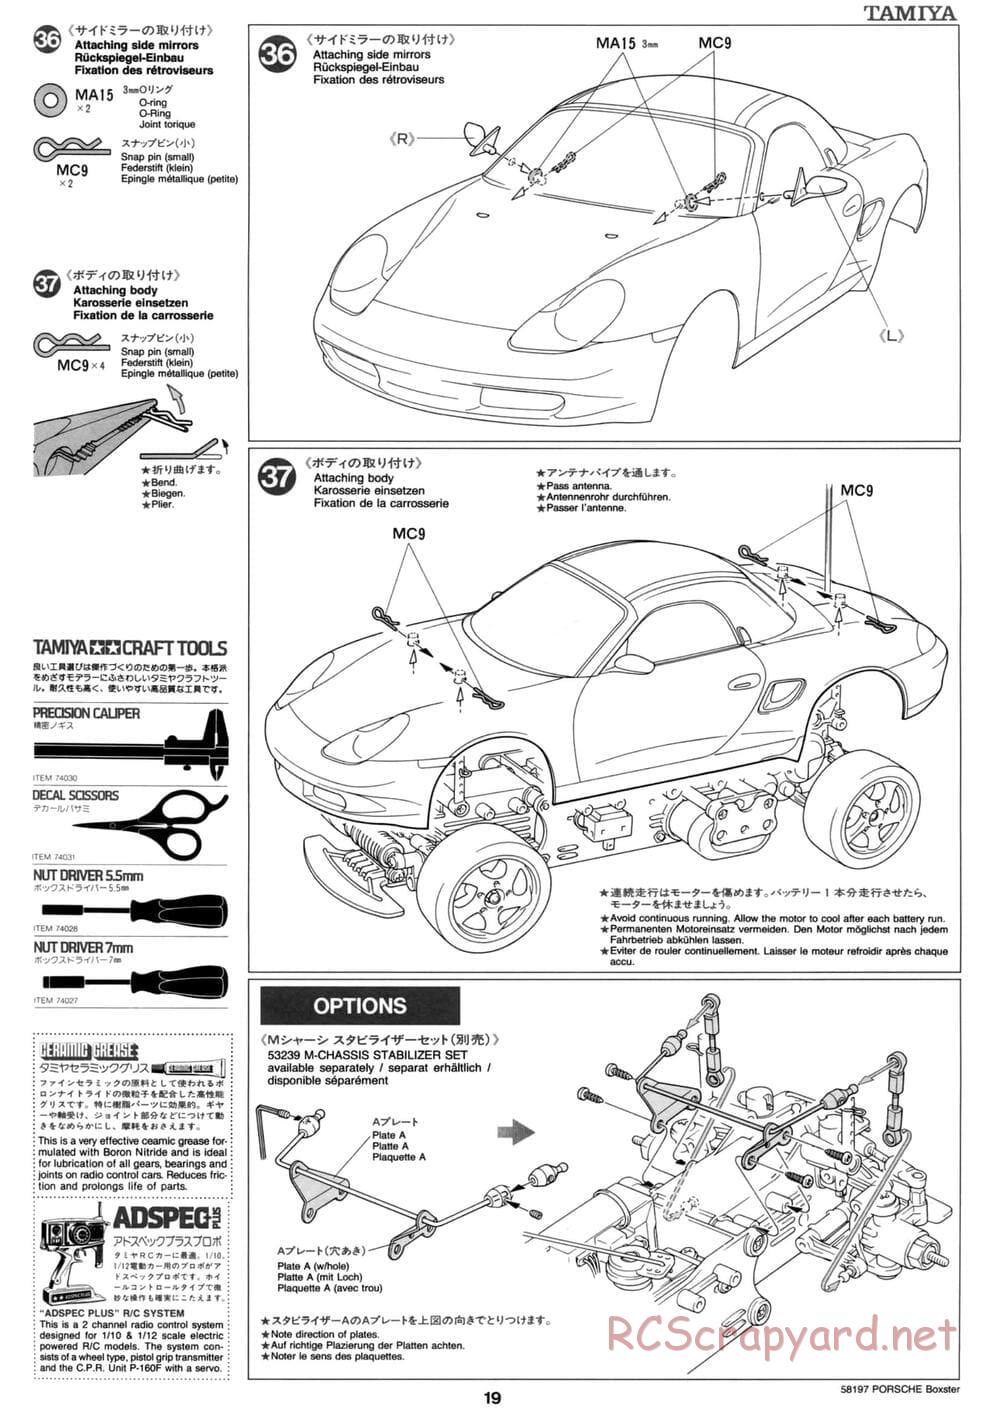 Tamiya - Porsche Boxster - M02L Chassis - Manual - Page 19